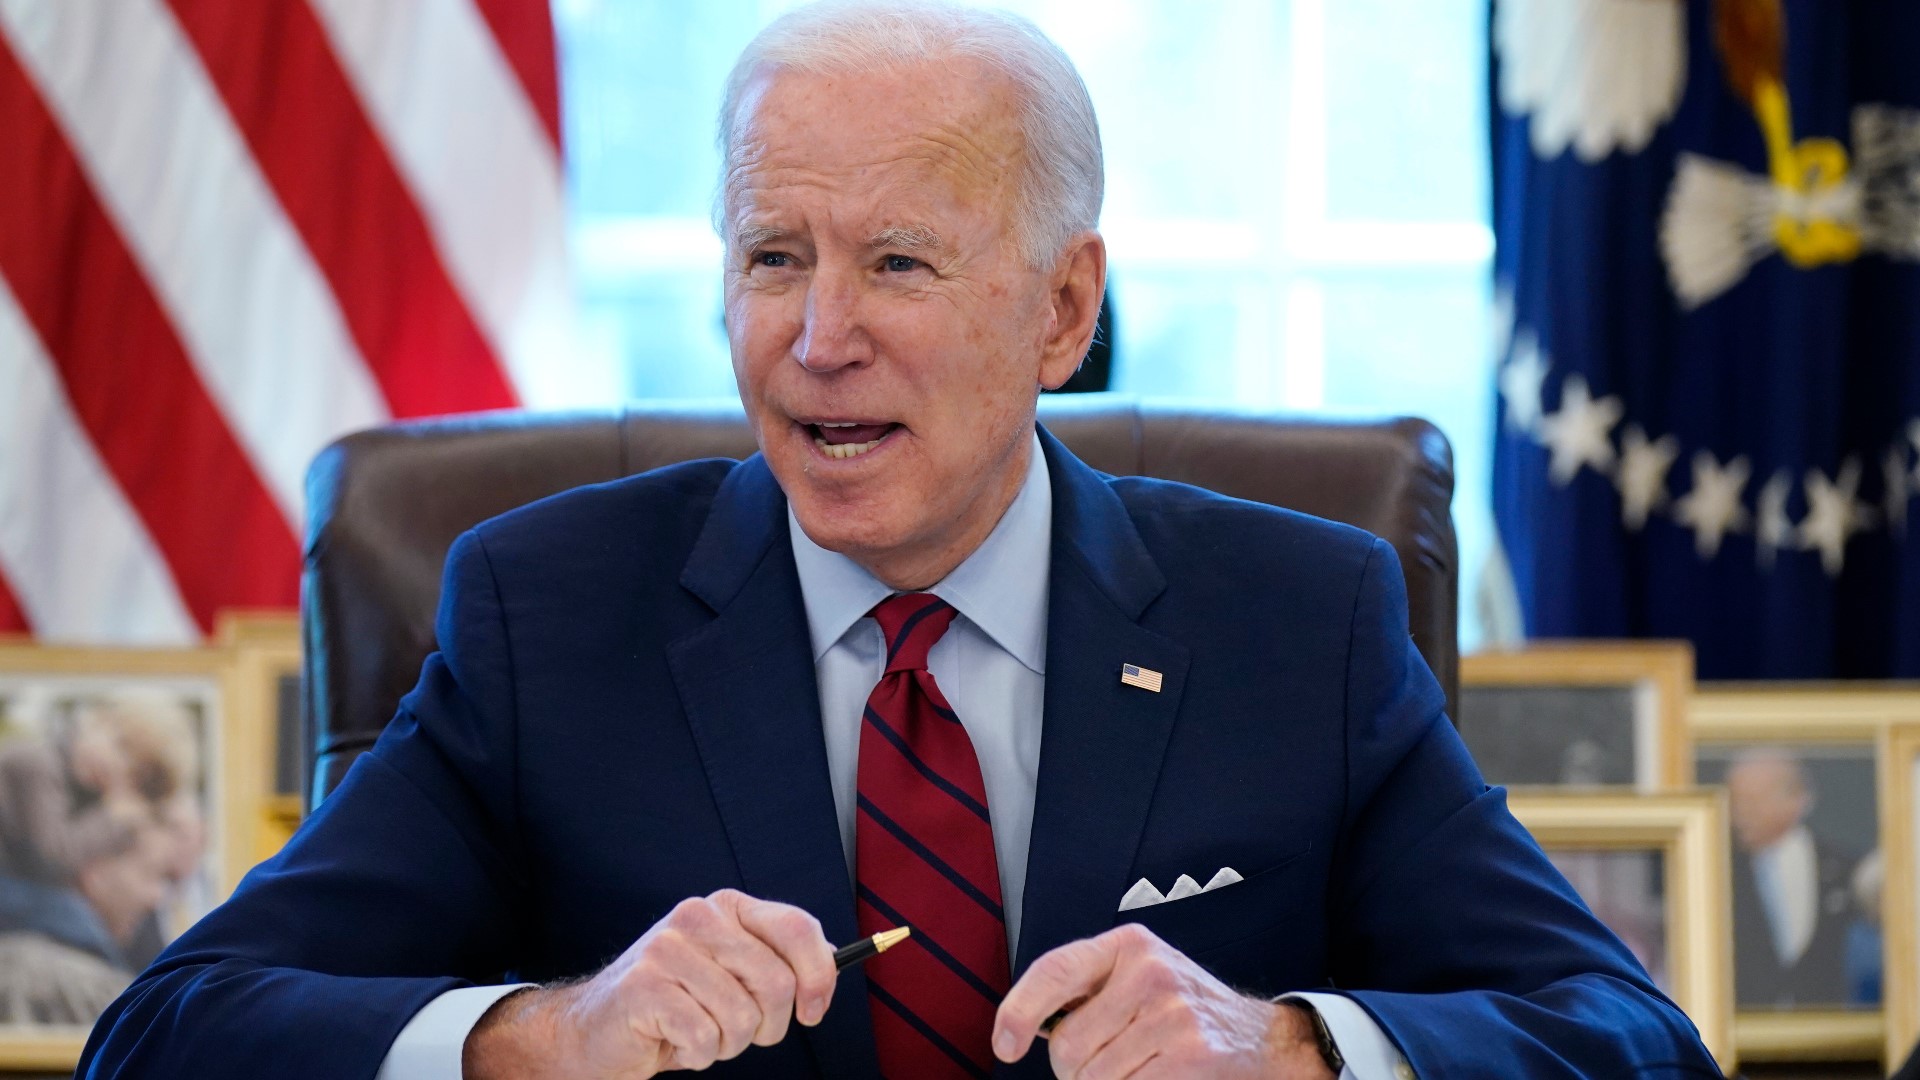 The KING 5/SurveyUSA poll shows the majority of voters in Washington state gave President Joe Biden a positive rating, but there is a split along party lines.